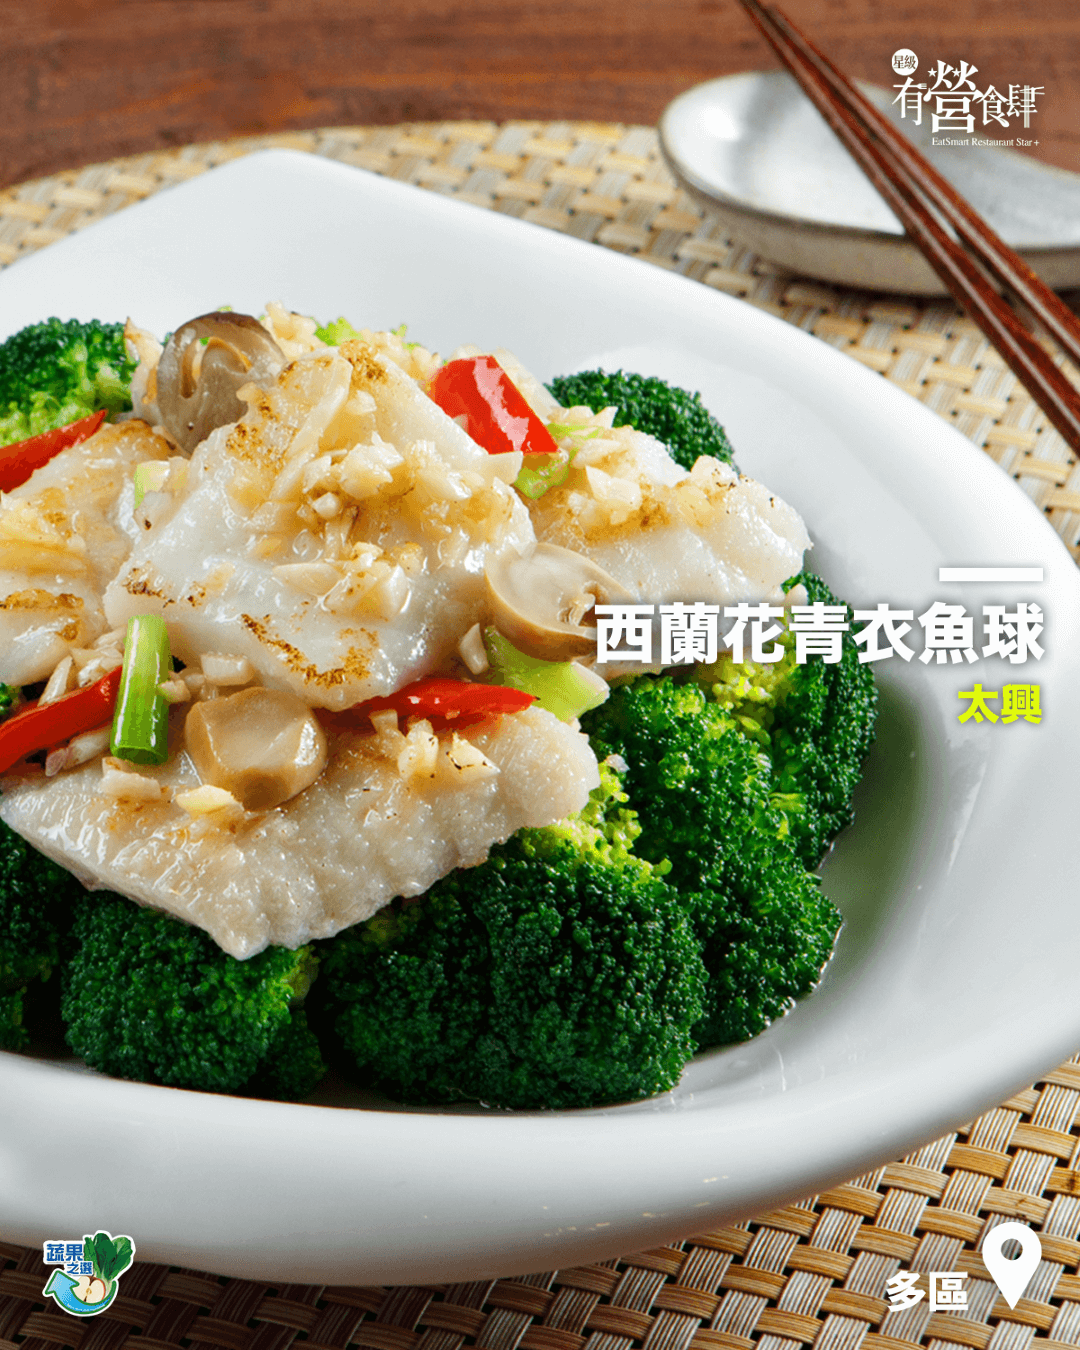 Stir-fried Fish Fillet with Broccoli